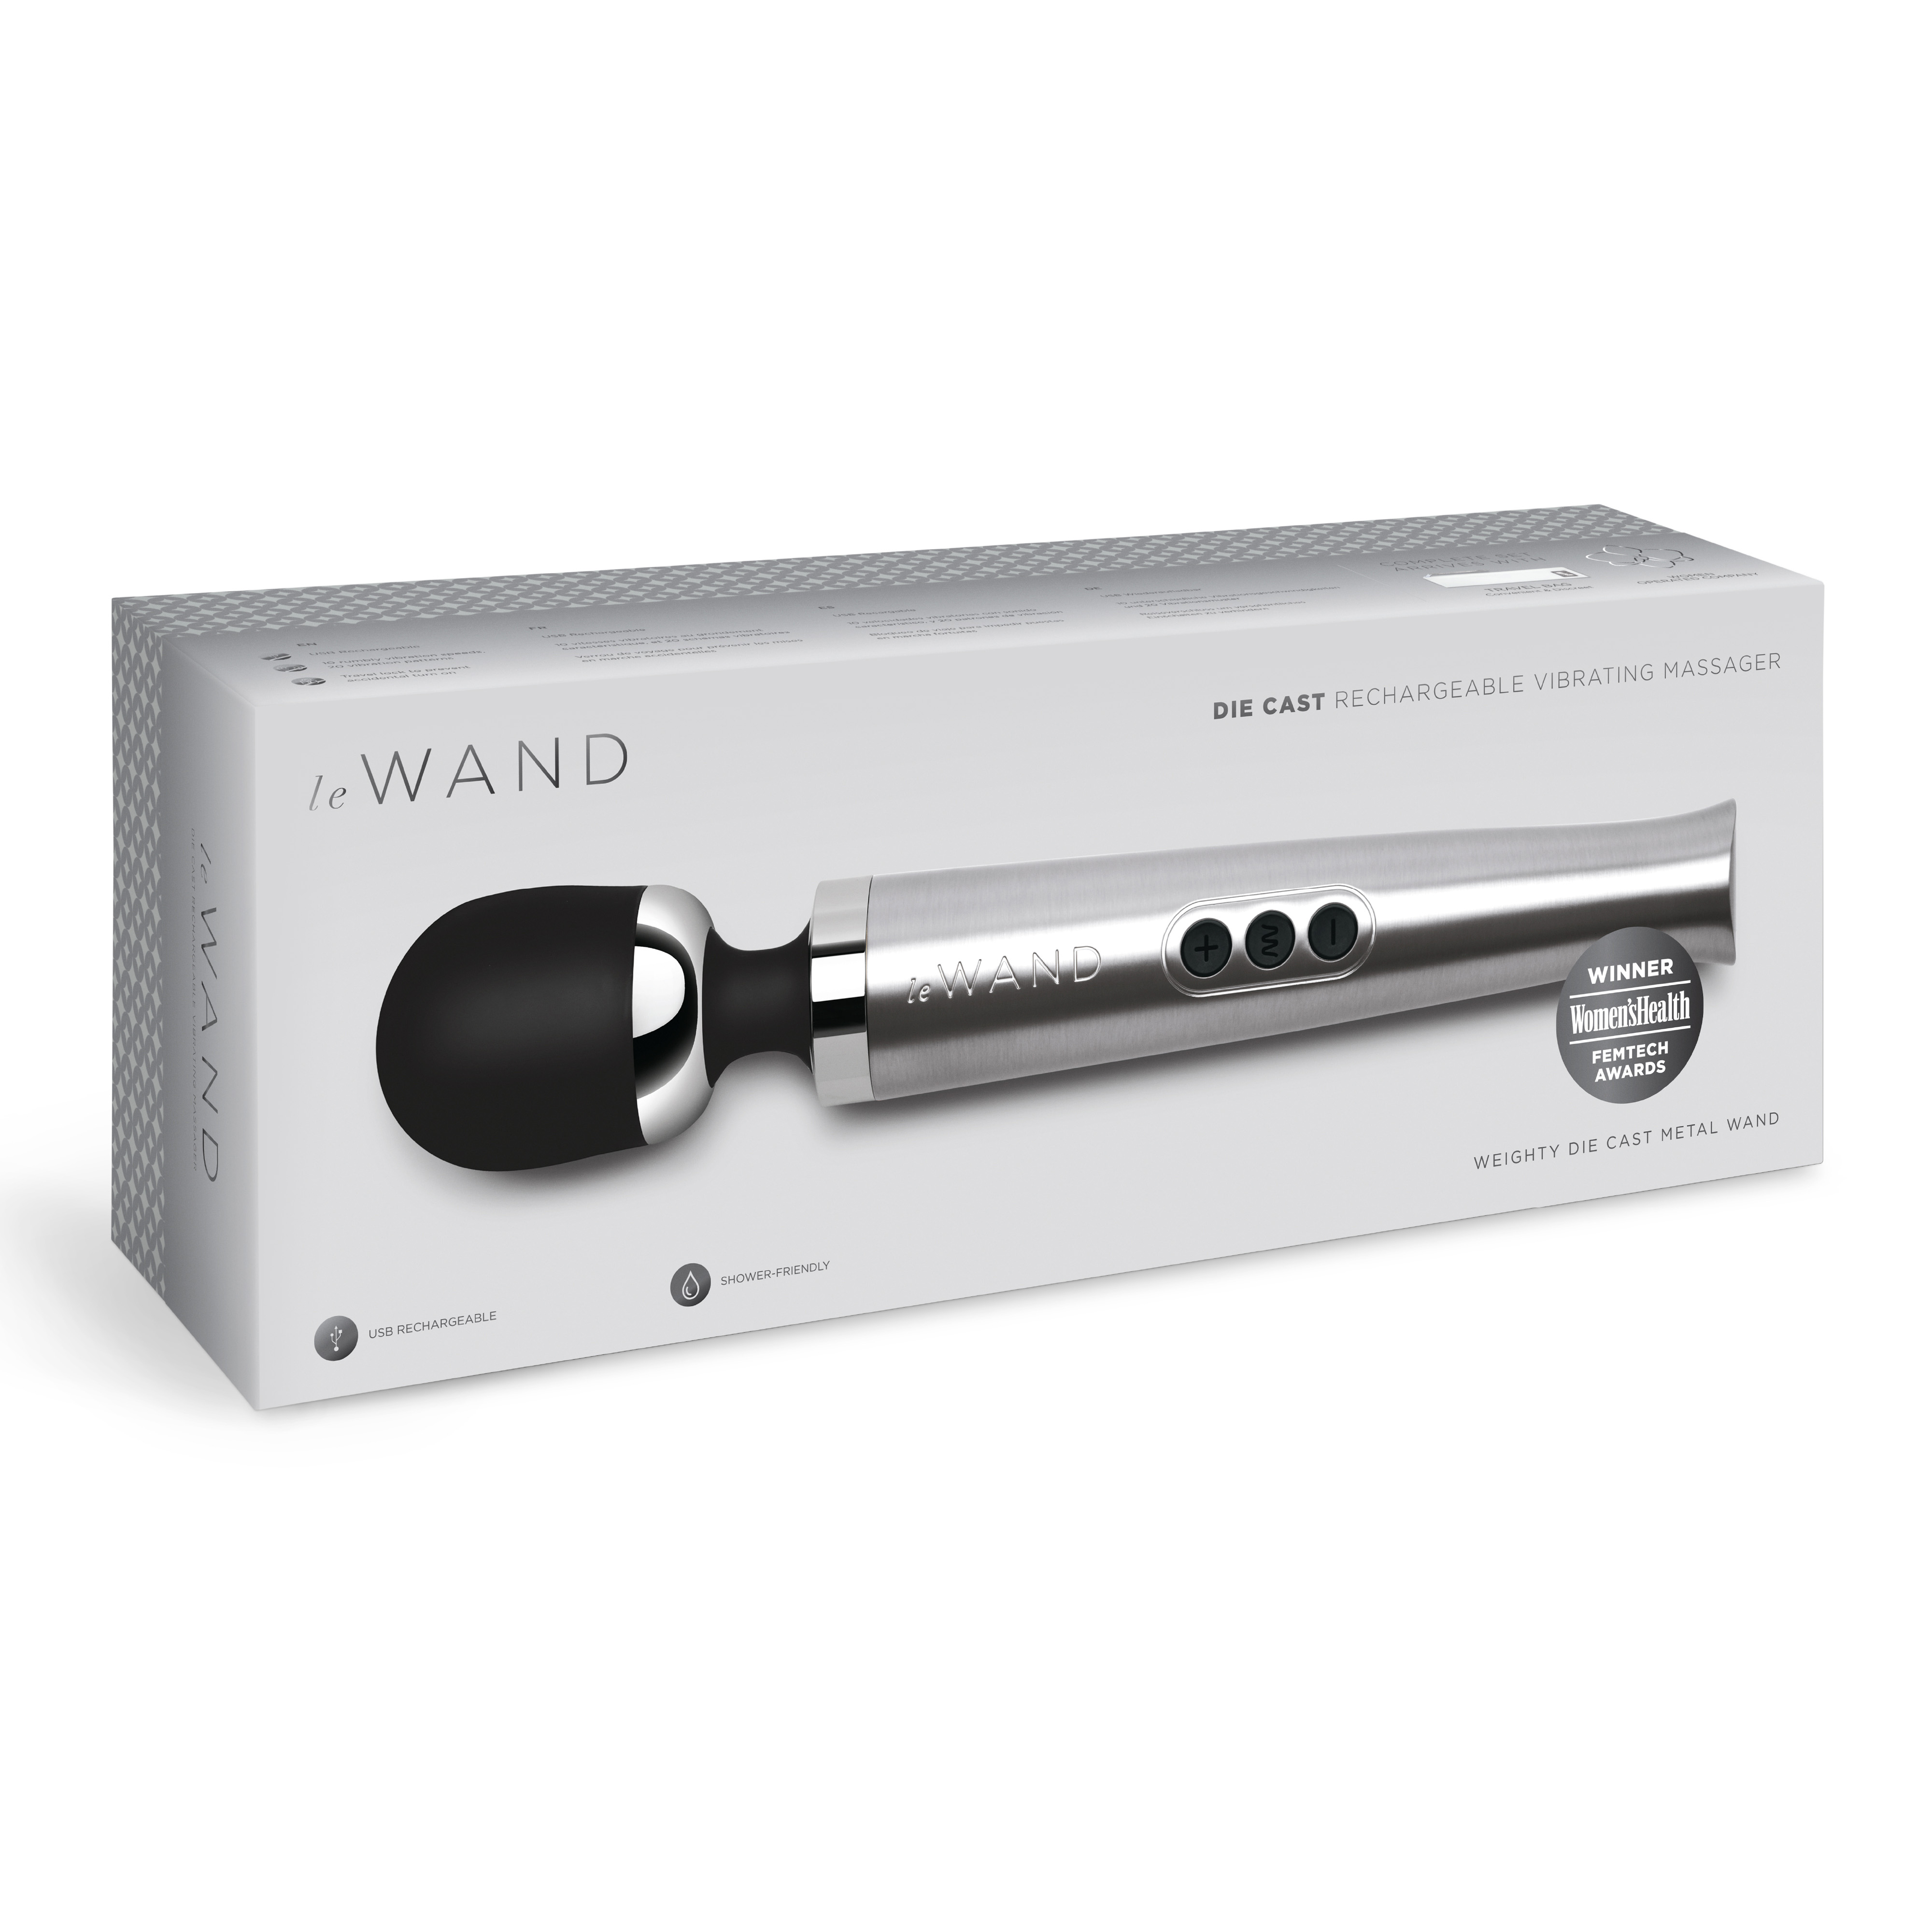 Le Wand Die Cast rechargeable massager silver